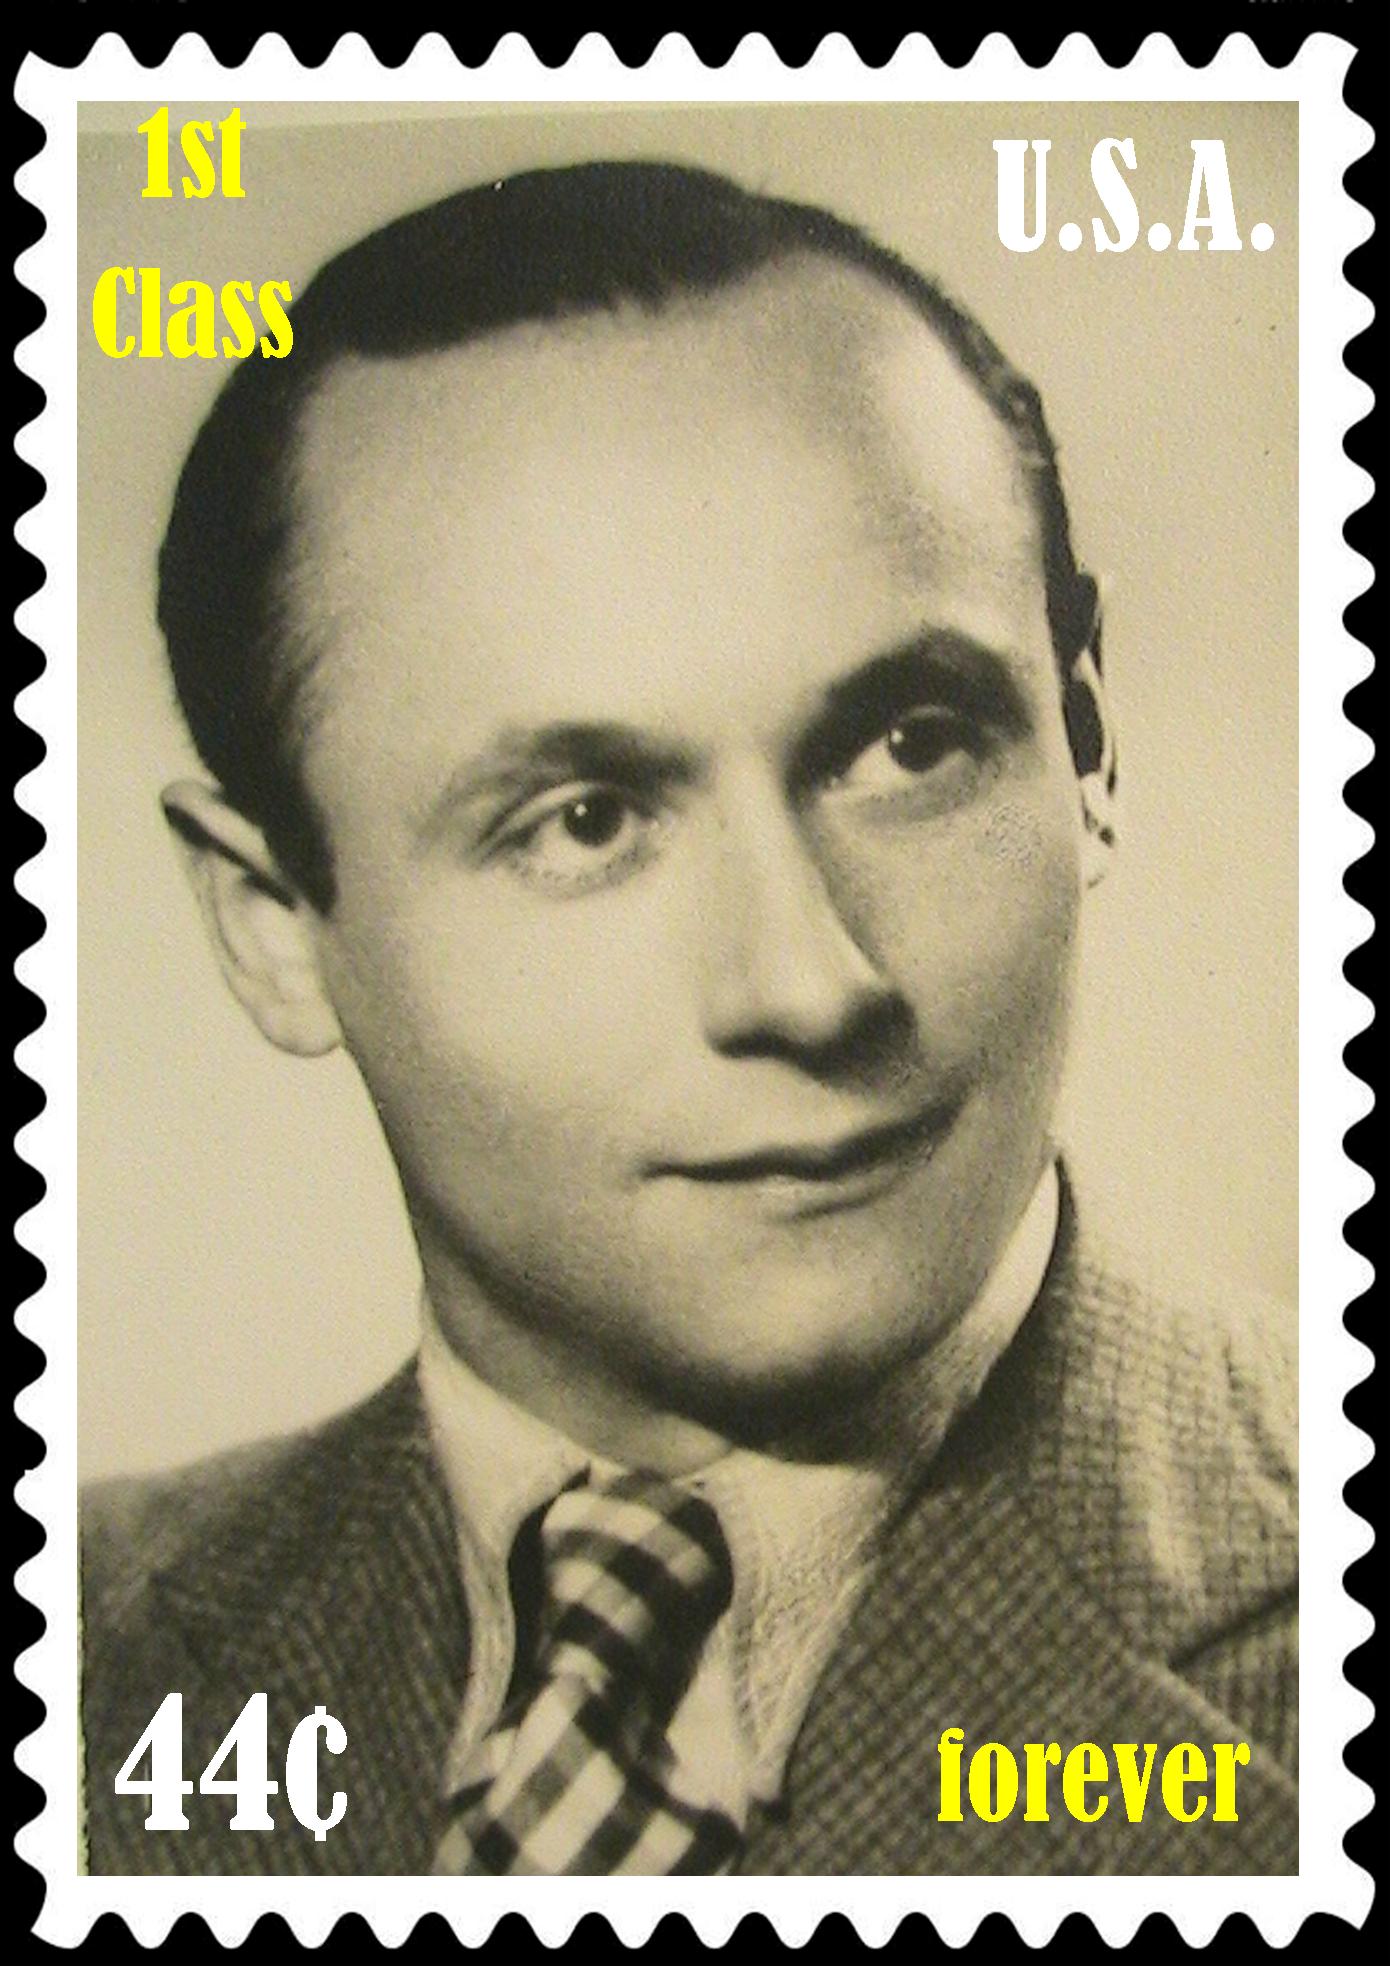 This is Victor Perantoni, one of the great stamp collectors of the 20th century. As an Italian born in Poland in 1912 he lived to witness most of the 20th century. He died in 2002 with regret having seen his century's fruit: 9/11/2001